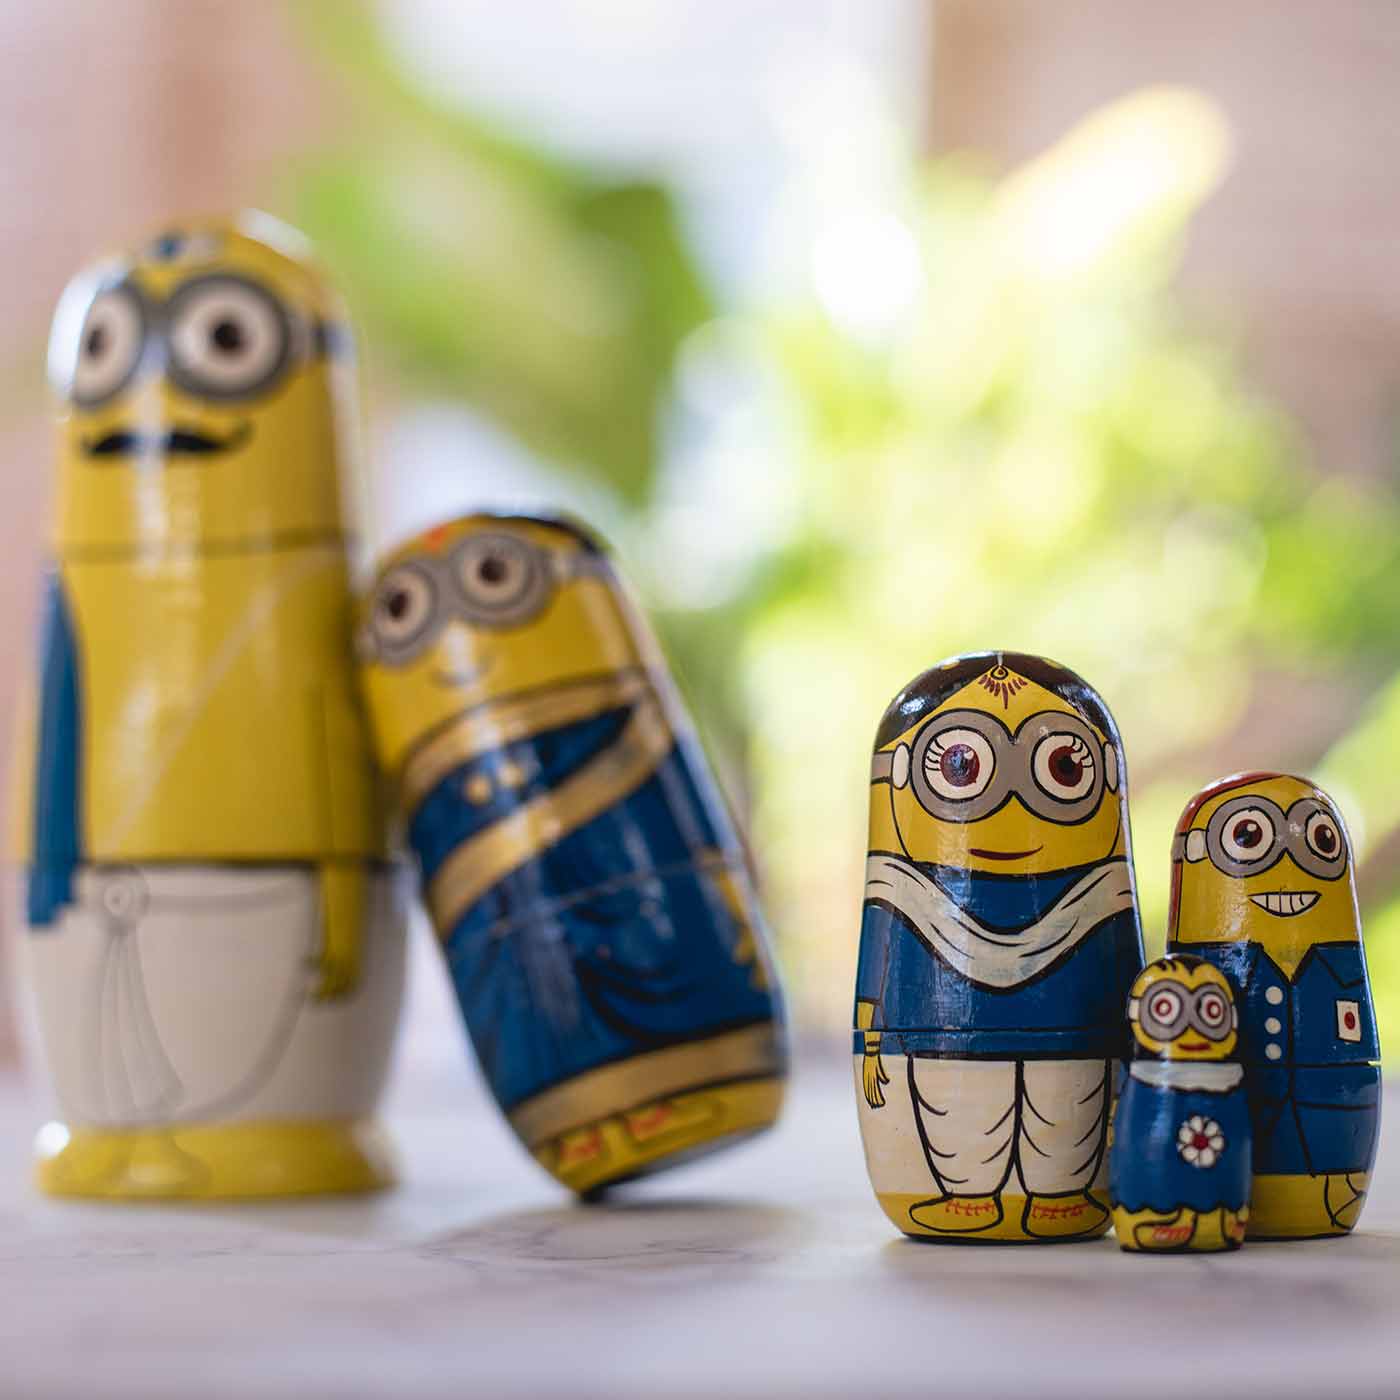 Get Minions Inspired Gift Ideas for Despicable Me Fans